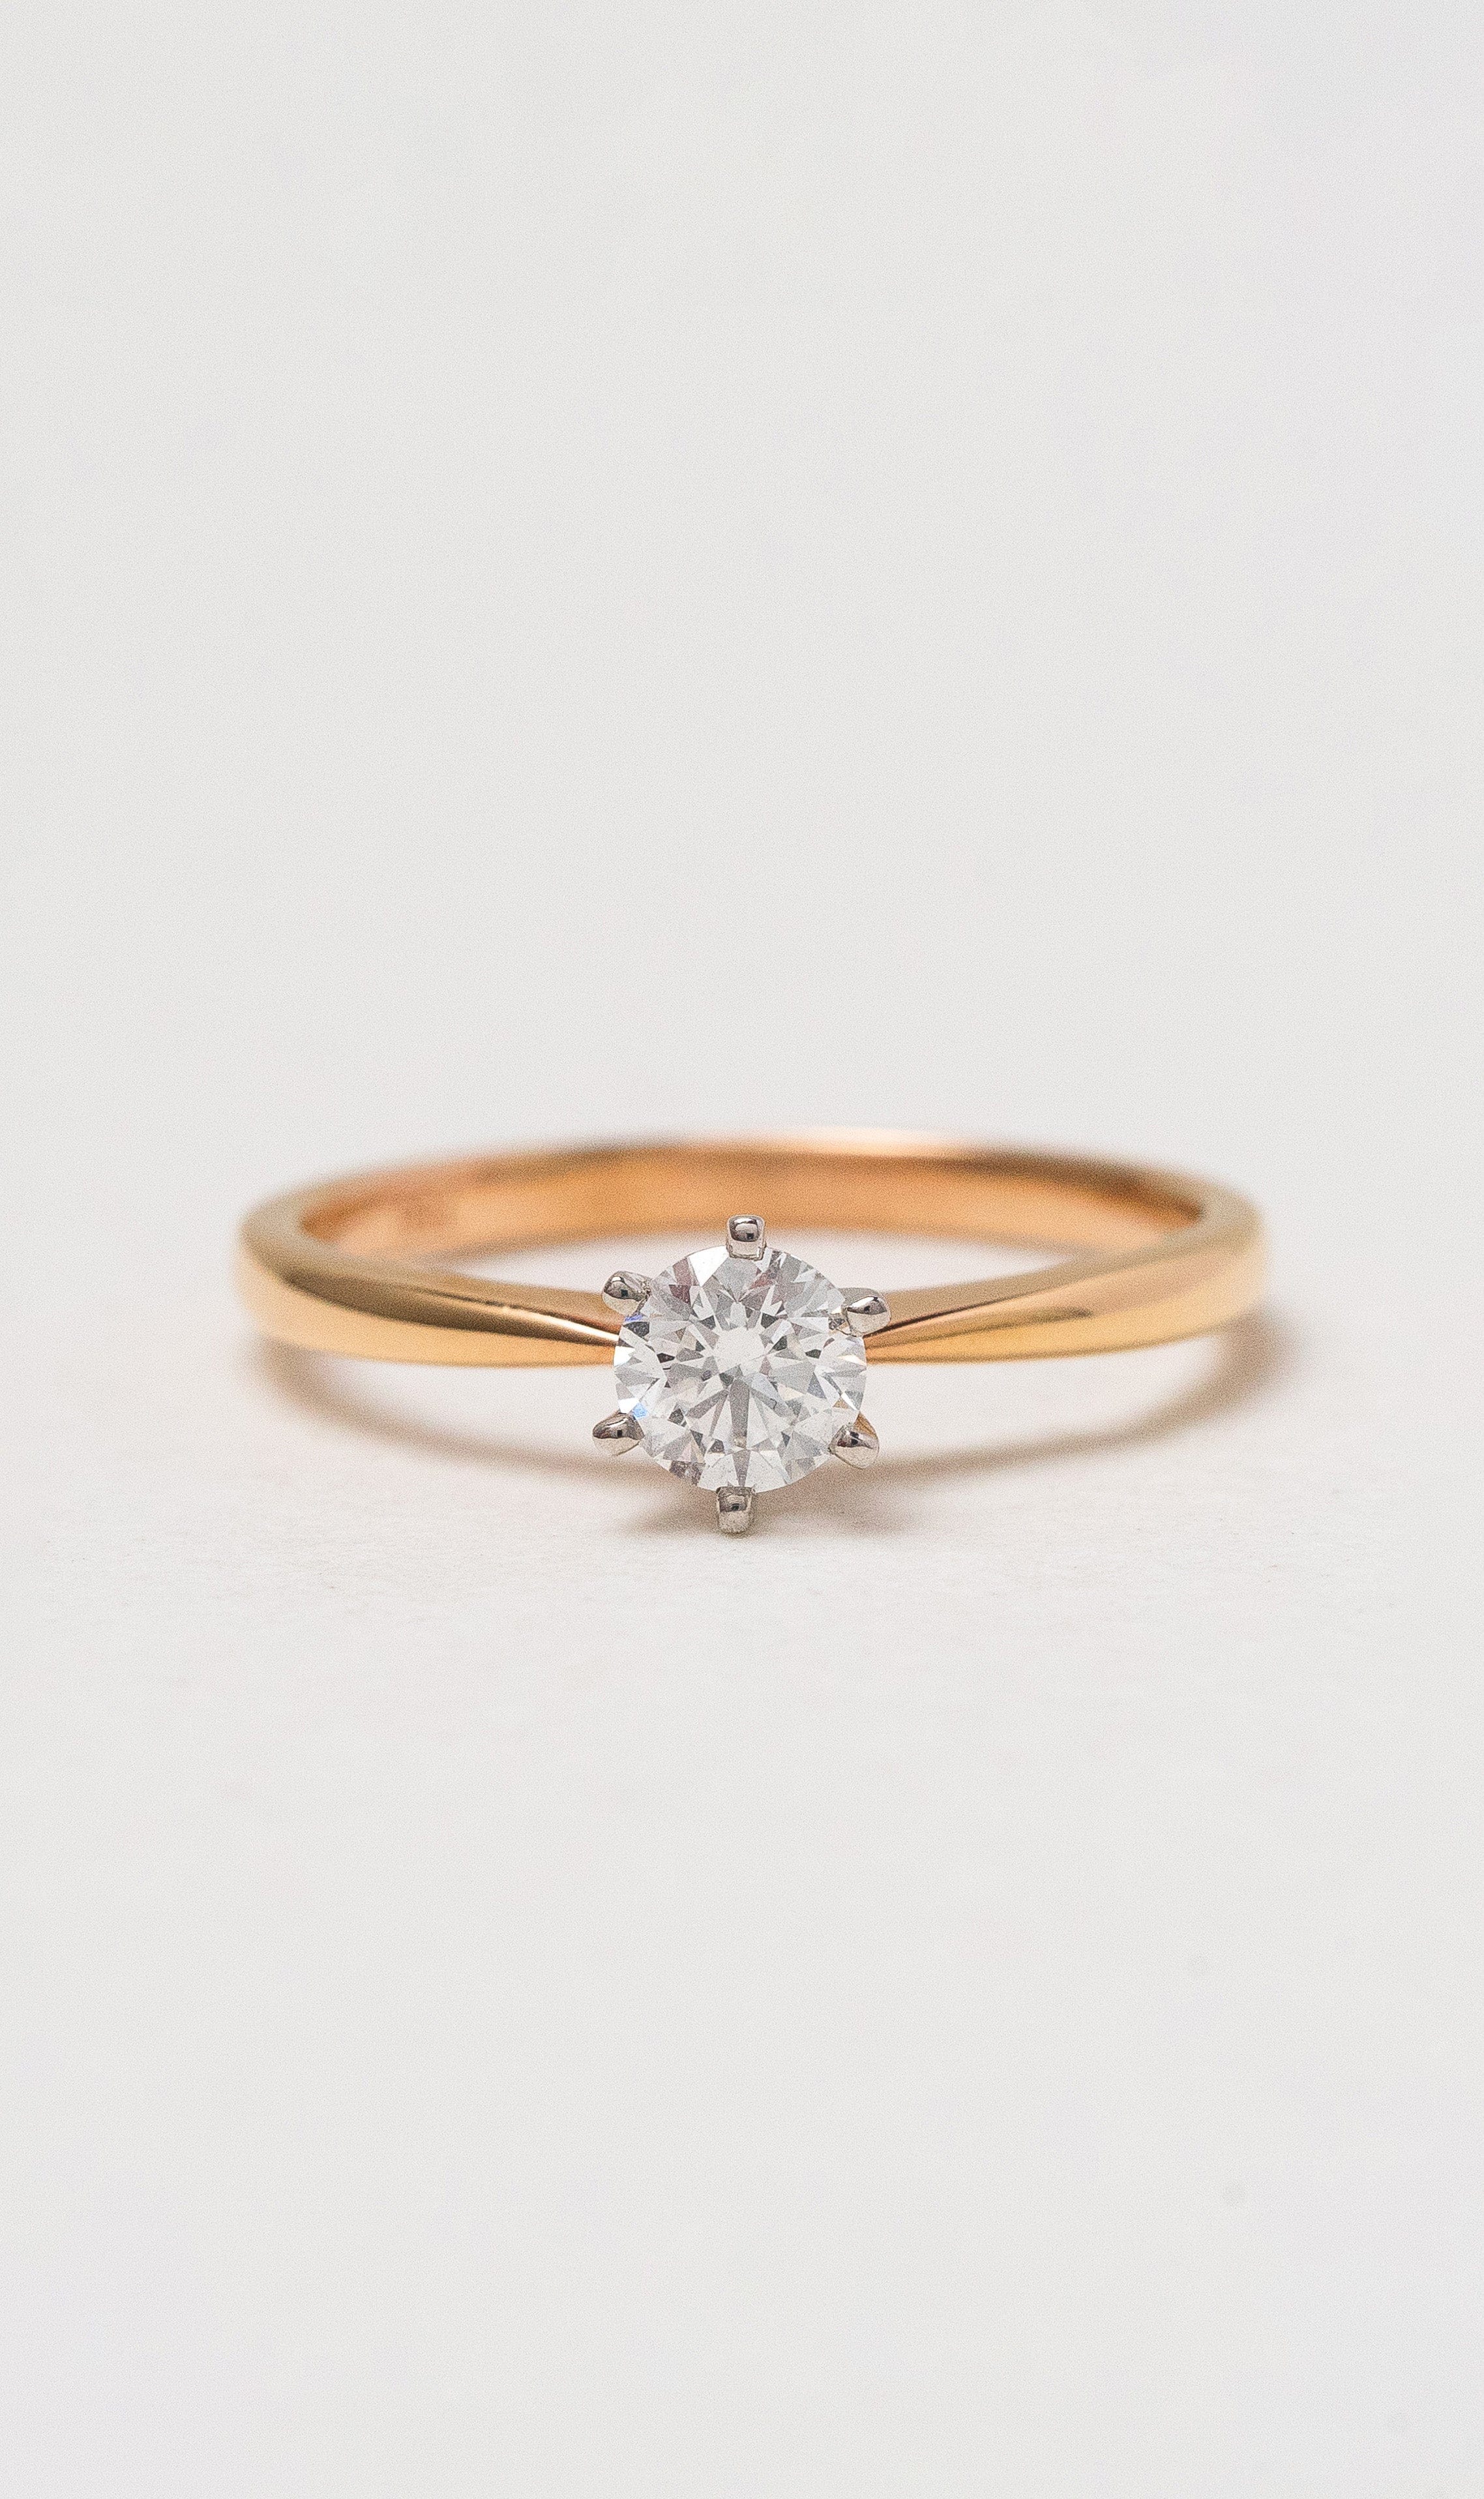 Hogans Family Jewellers 18K RWG 6 Claw Solitaire Diamond Ring